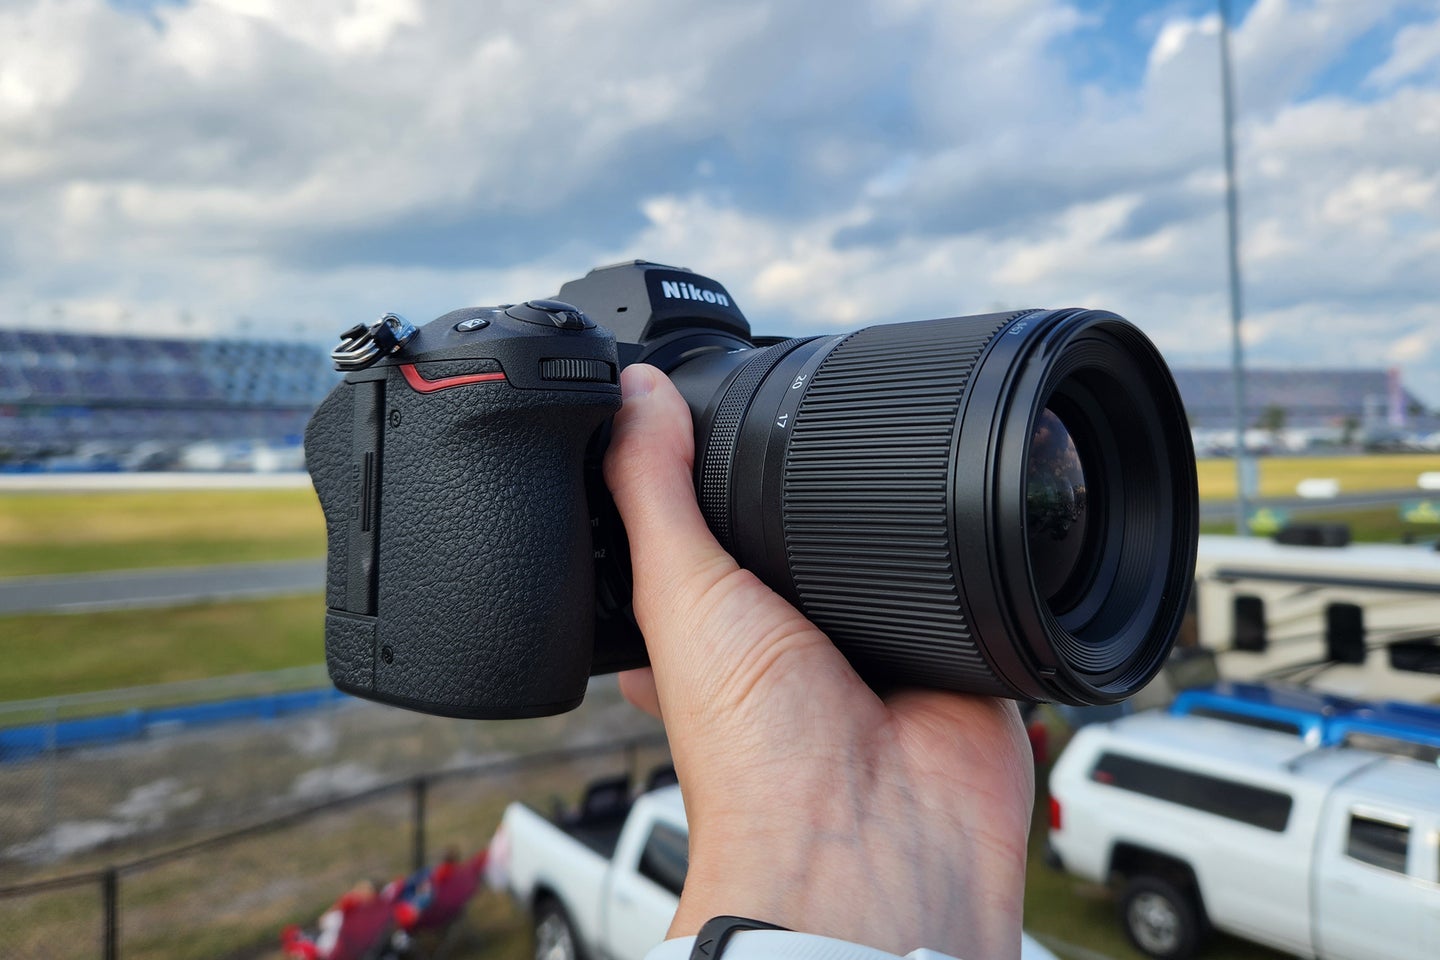 A Nikon camera held in front of a racetrack.